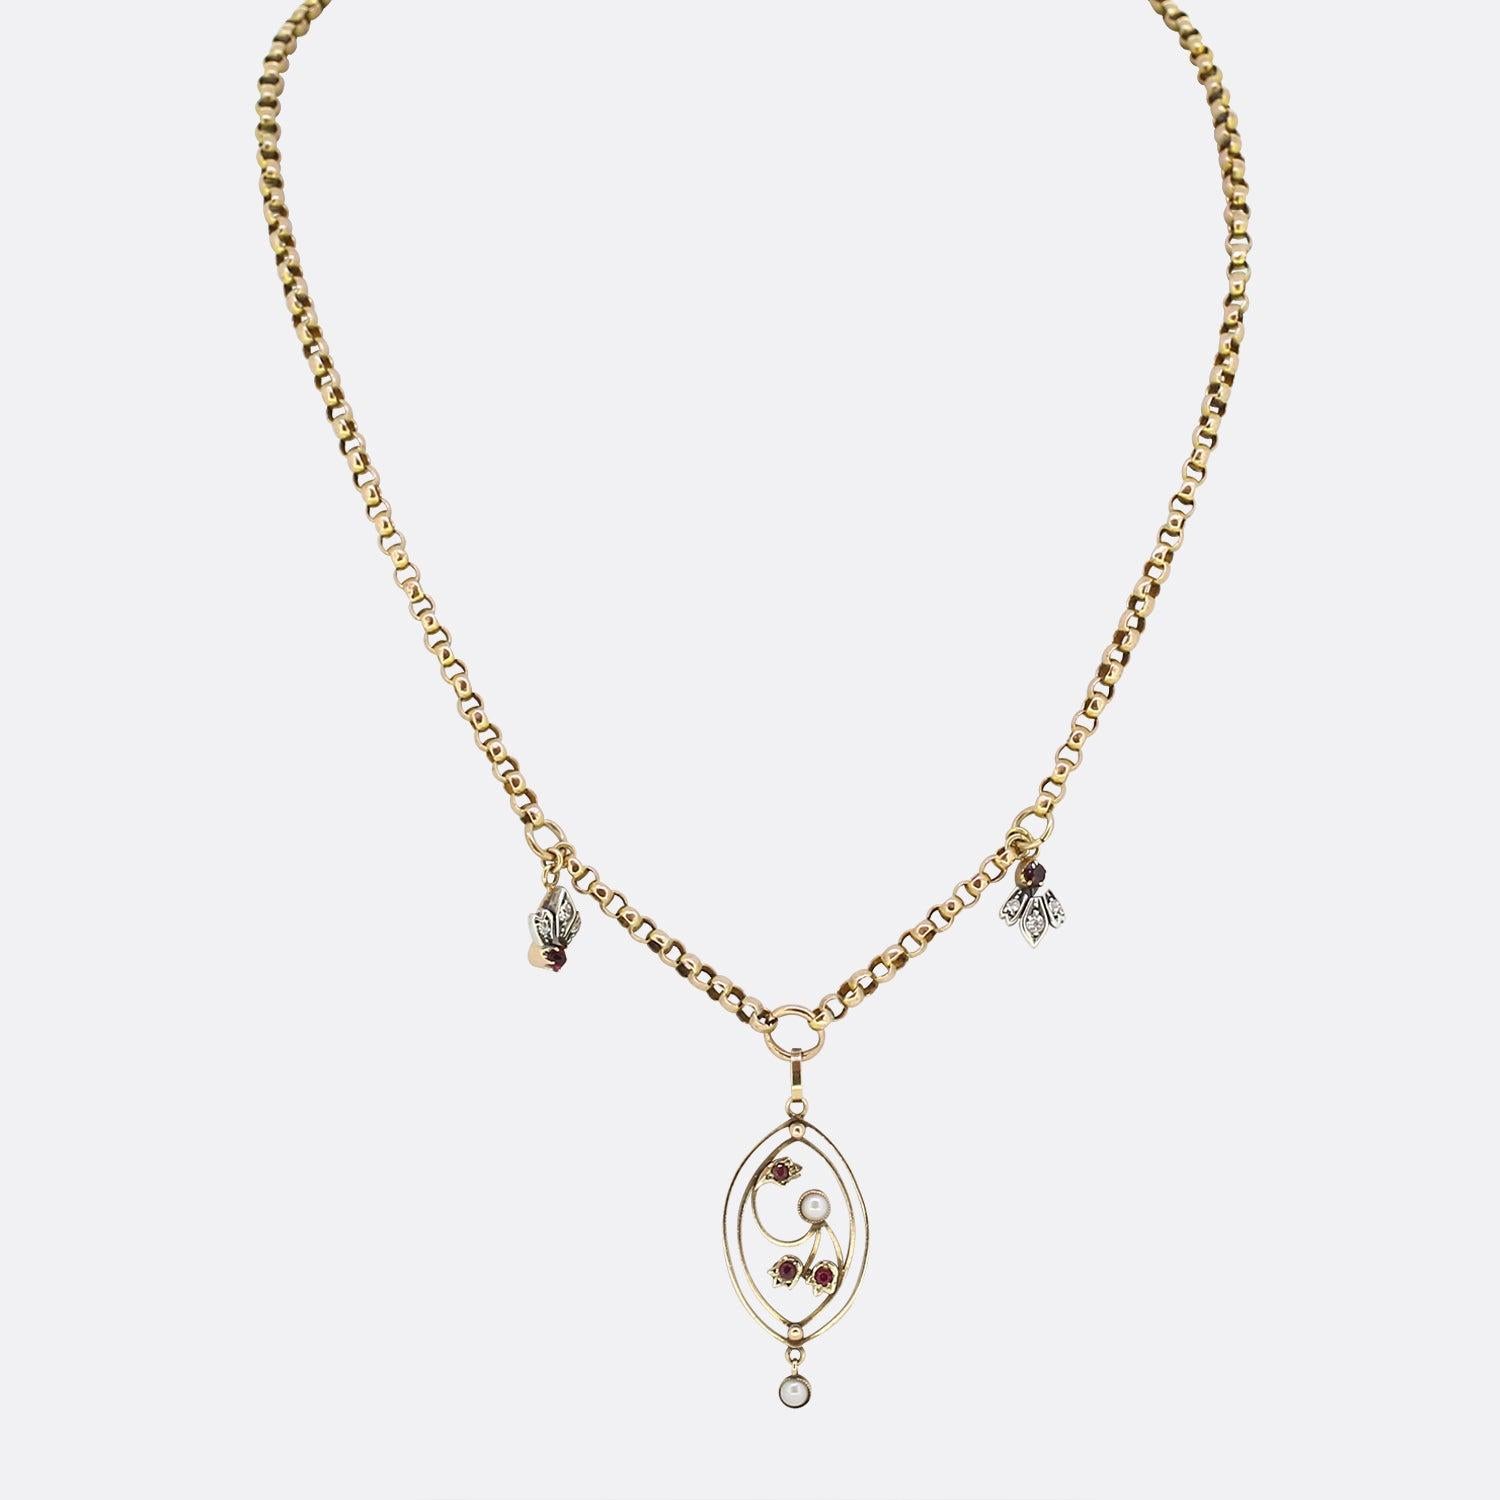 This is a vintage 9ct yellow gold belcher chain charm necklace. The necklace showcases an open oval shaped pendant featuring two natural pearls and three round red rubies. This pendant hangs freely from a belcher chain consisting of a duo of smaller